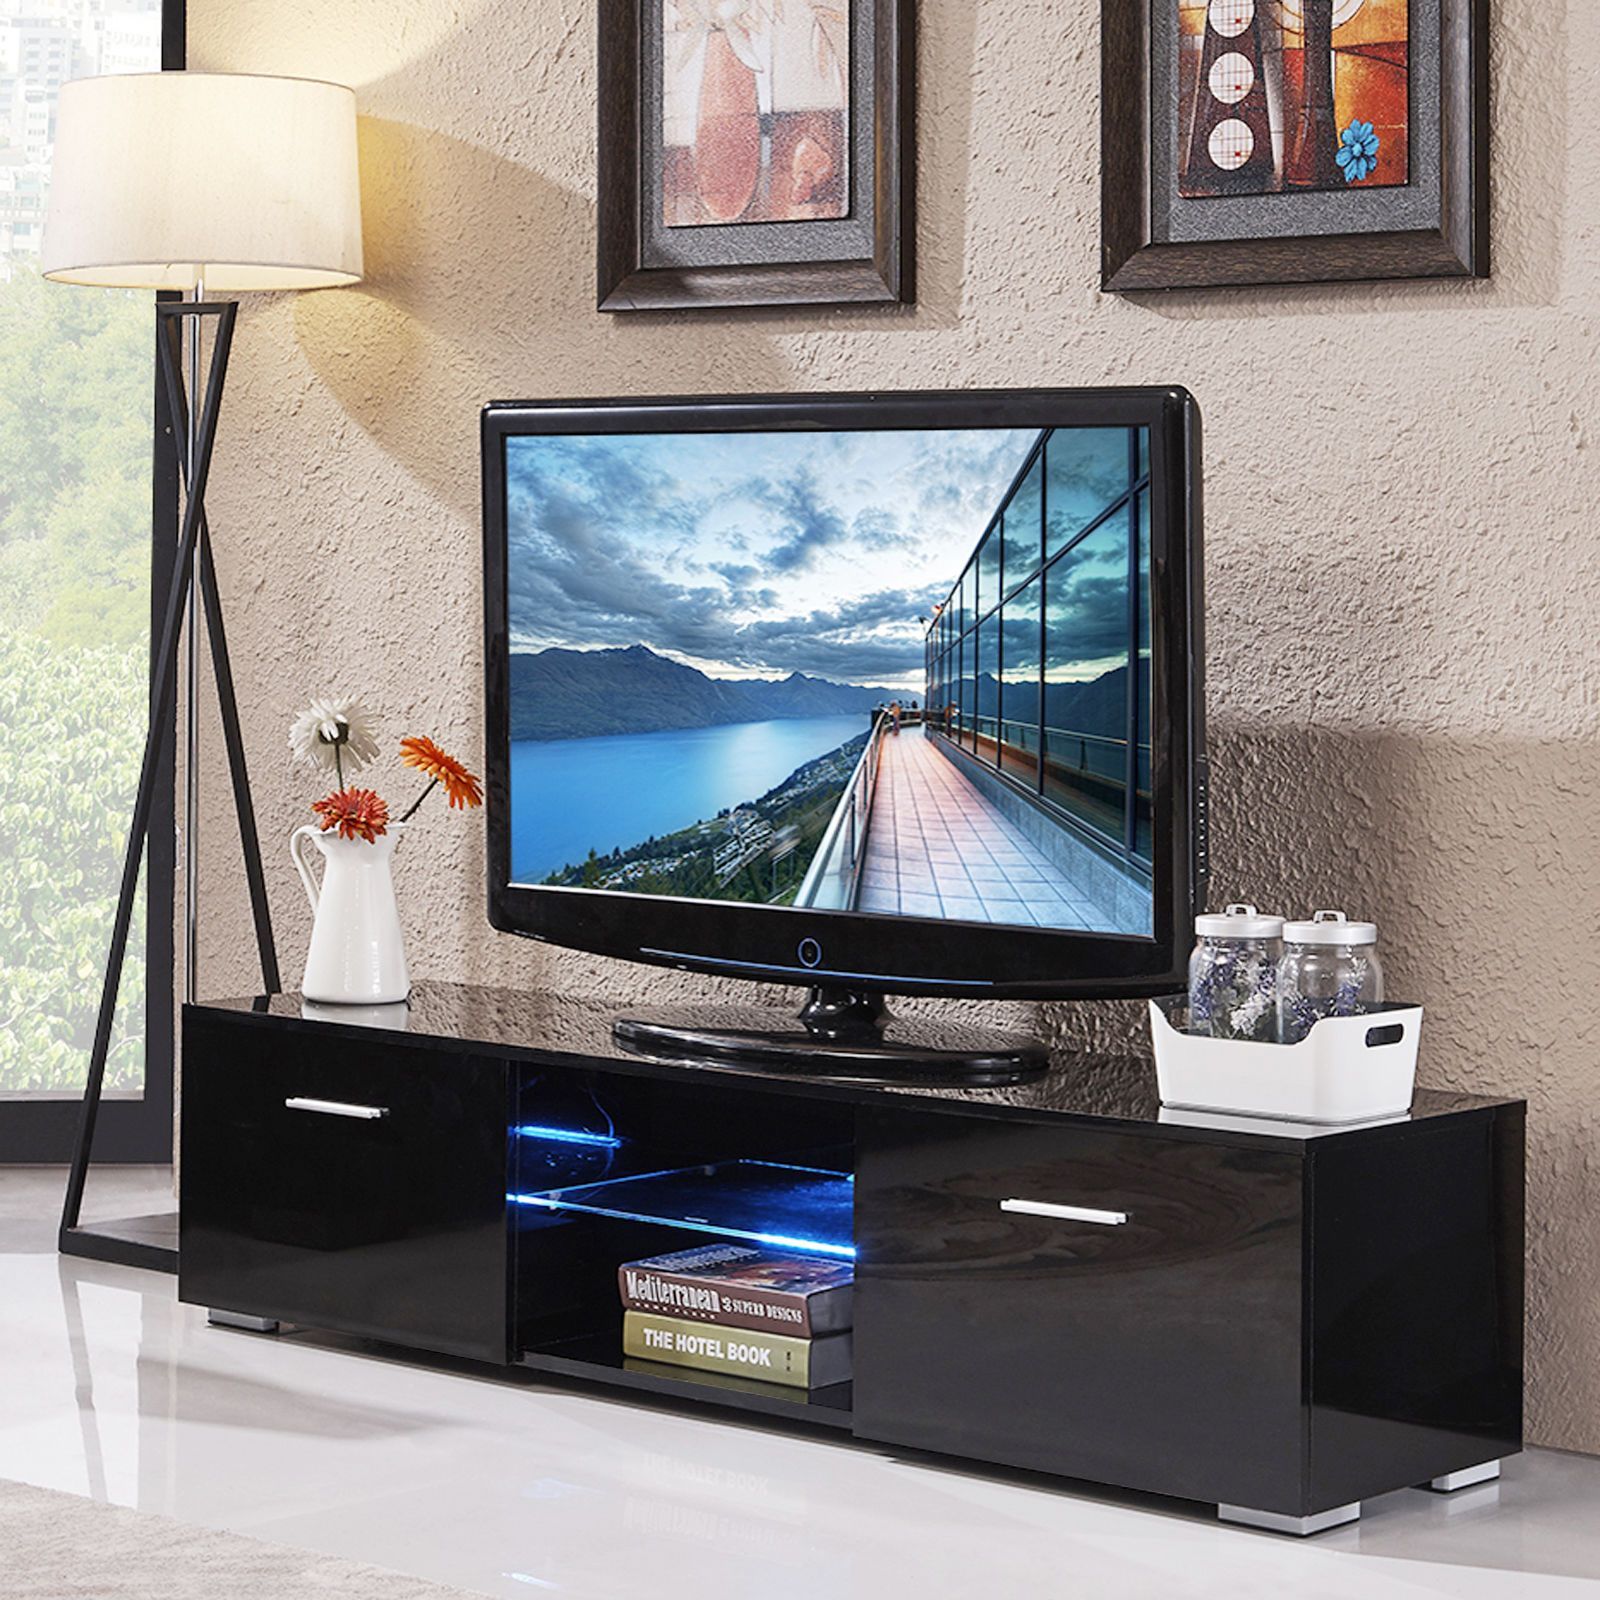 High Gloss Tv Stand Unit Cabinet Console Furniture W/led Shelves 2 Inside Led Tv Stands With Outlet (View 10 of 20)